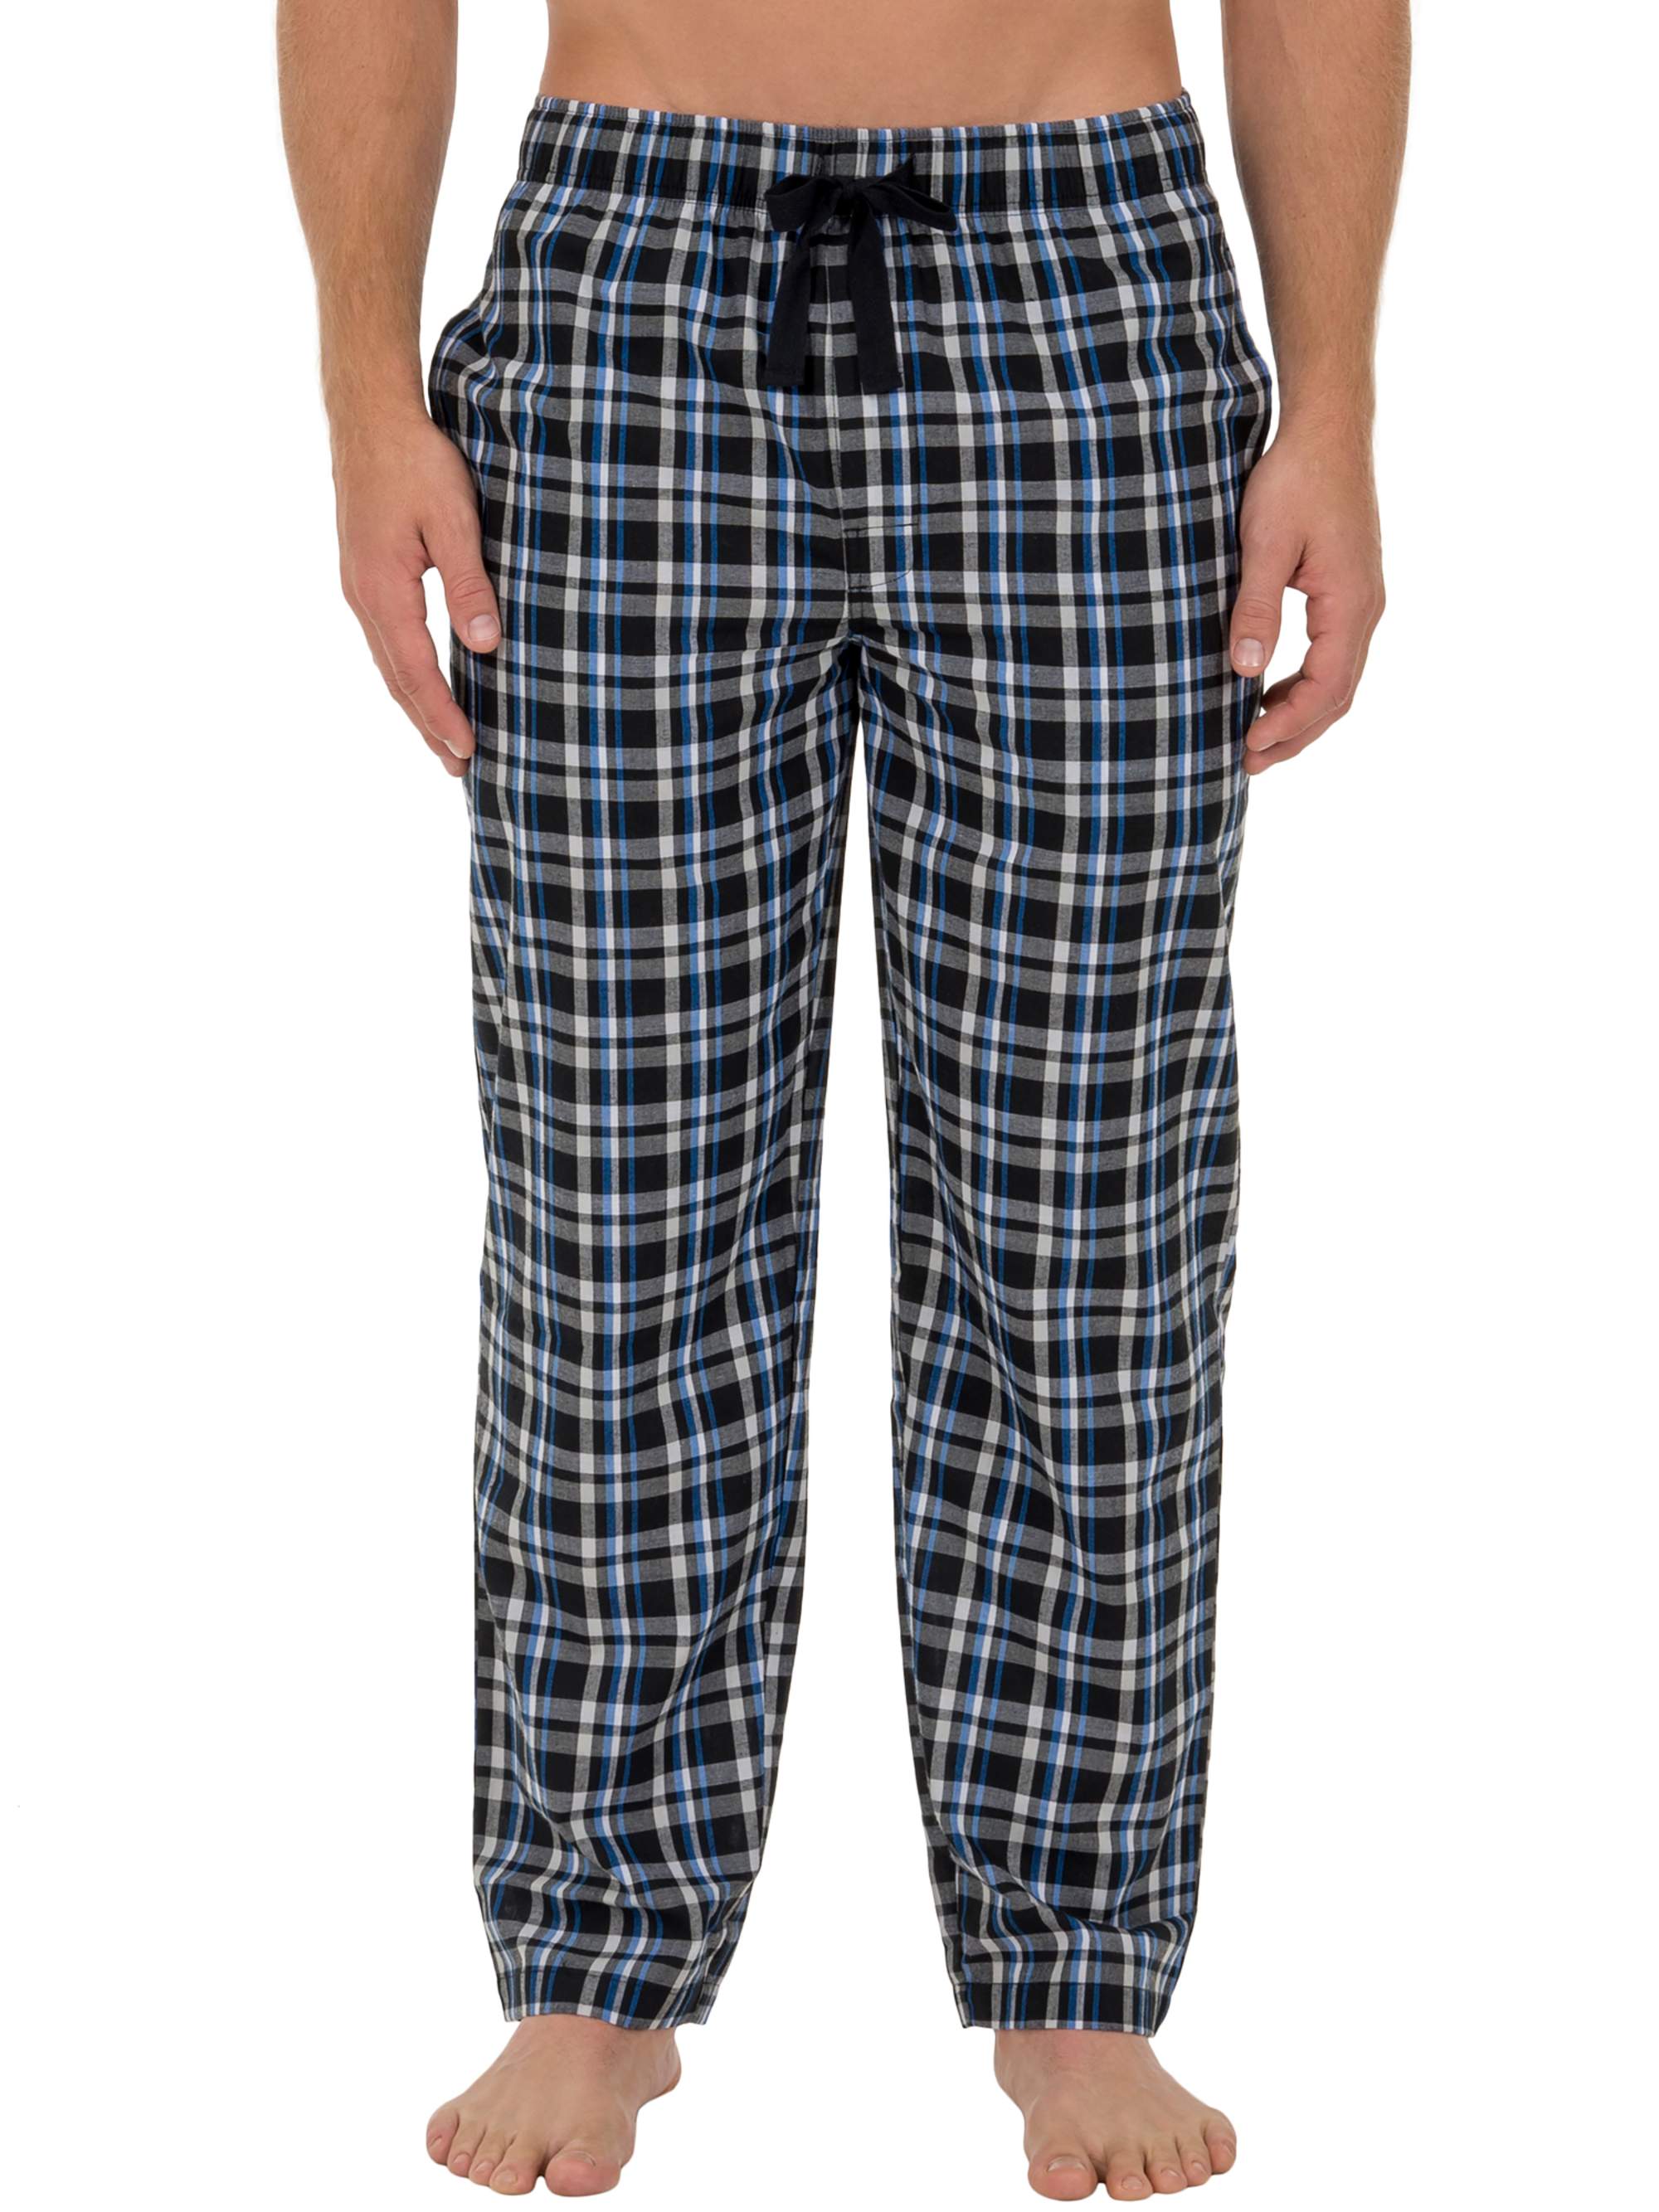 Fruit of the Loom Men's and Big Men's Microsanded Woven Plaid Pajama Pants, Sizes S-6XL & LT-3XLT - image 1 of 2